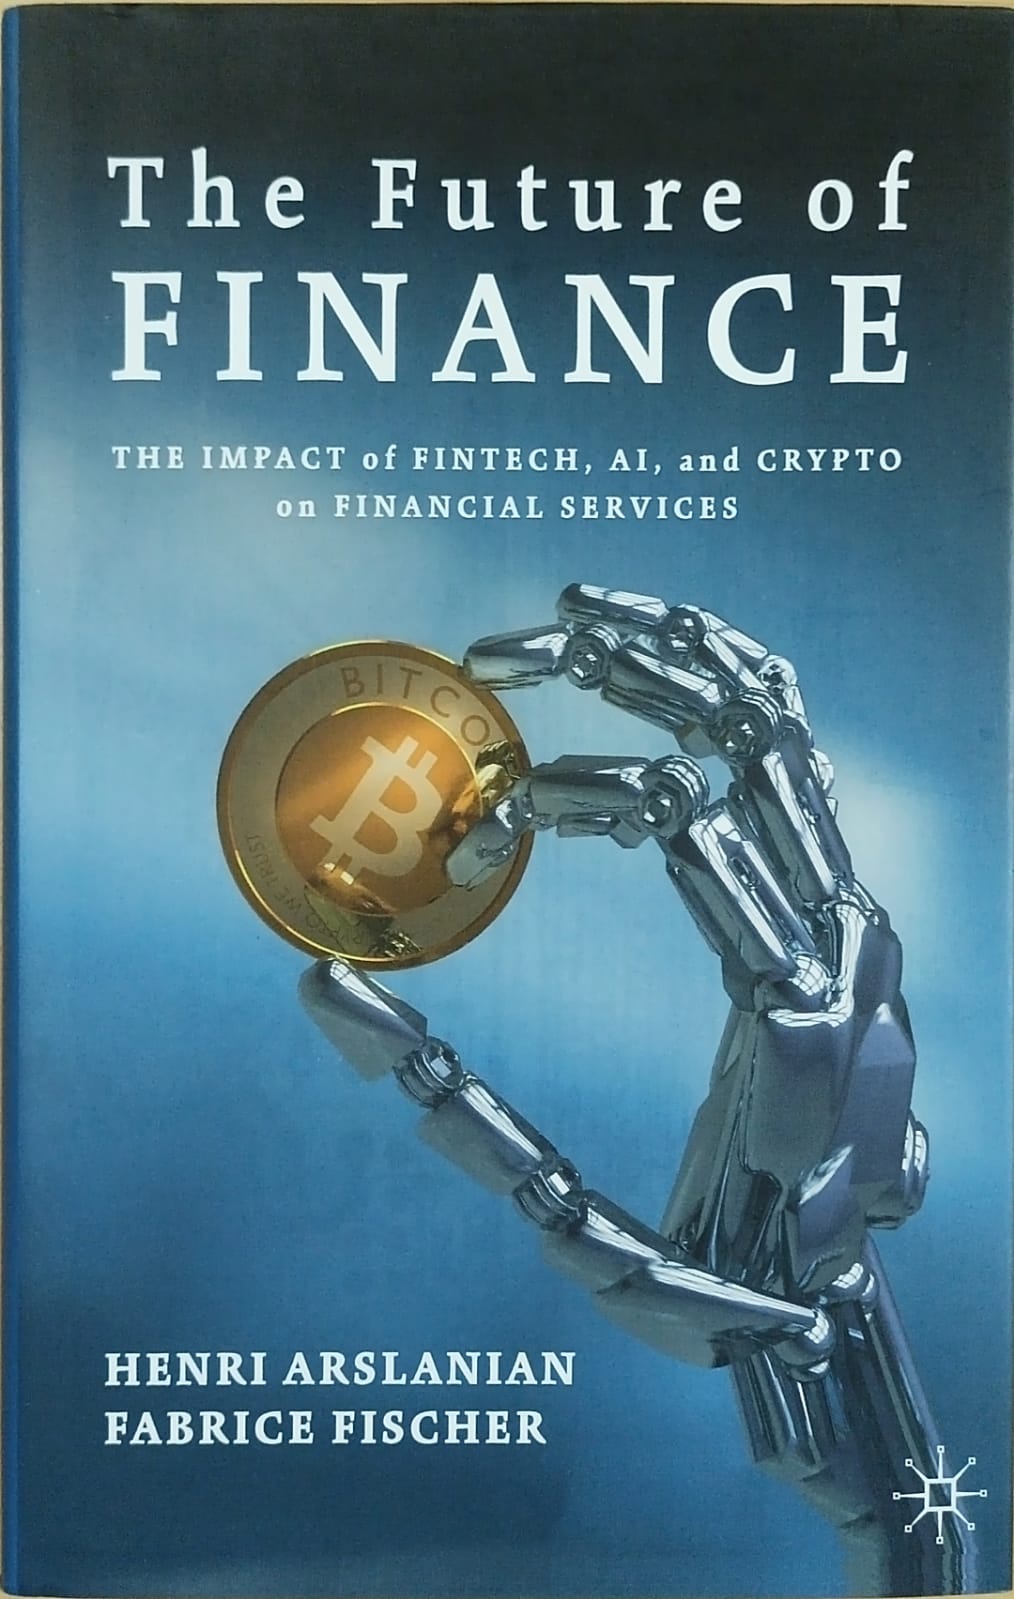 The future of finance: the impact of fintech, AI, and crypto on financial services